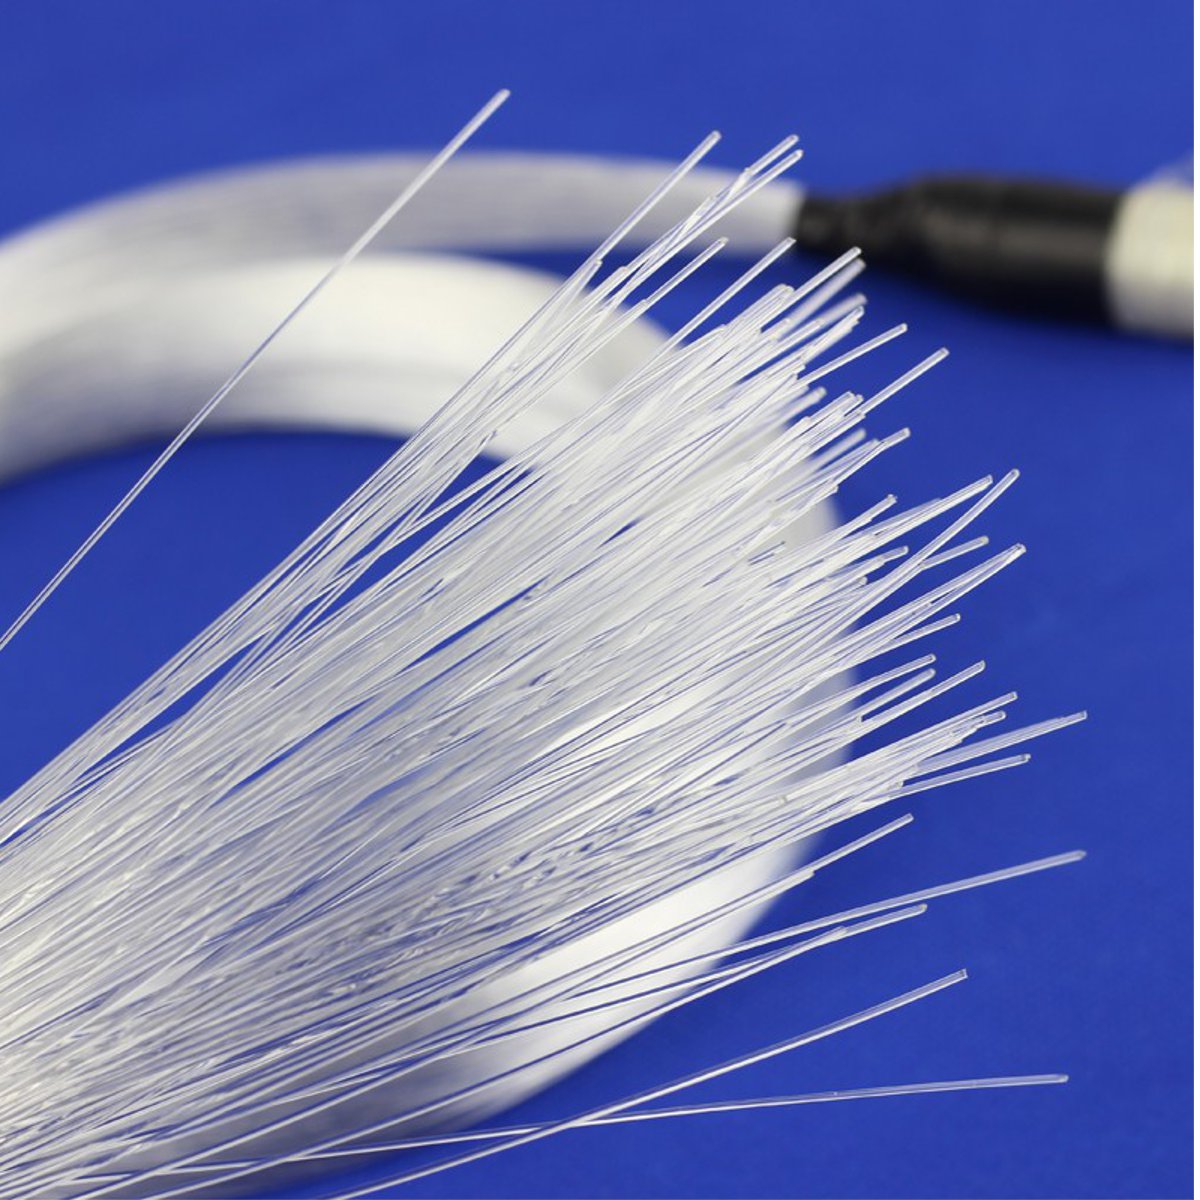 075mm-300mRoll-PMMA-Plastic-End-Glow-Fiber-Optic-Cable-For-Star-Sky-Ceiling-LED-Light-1225461-4